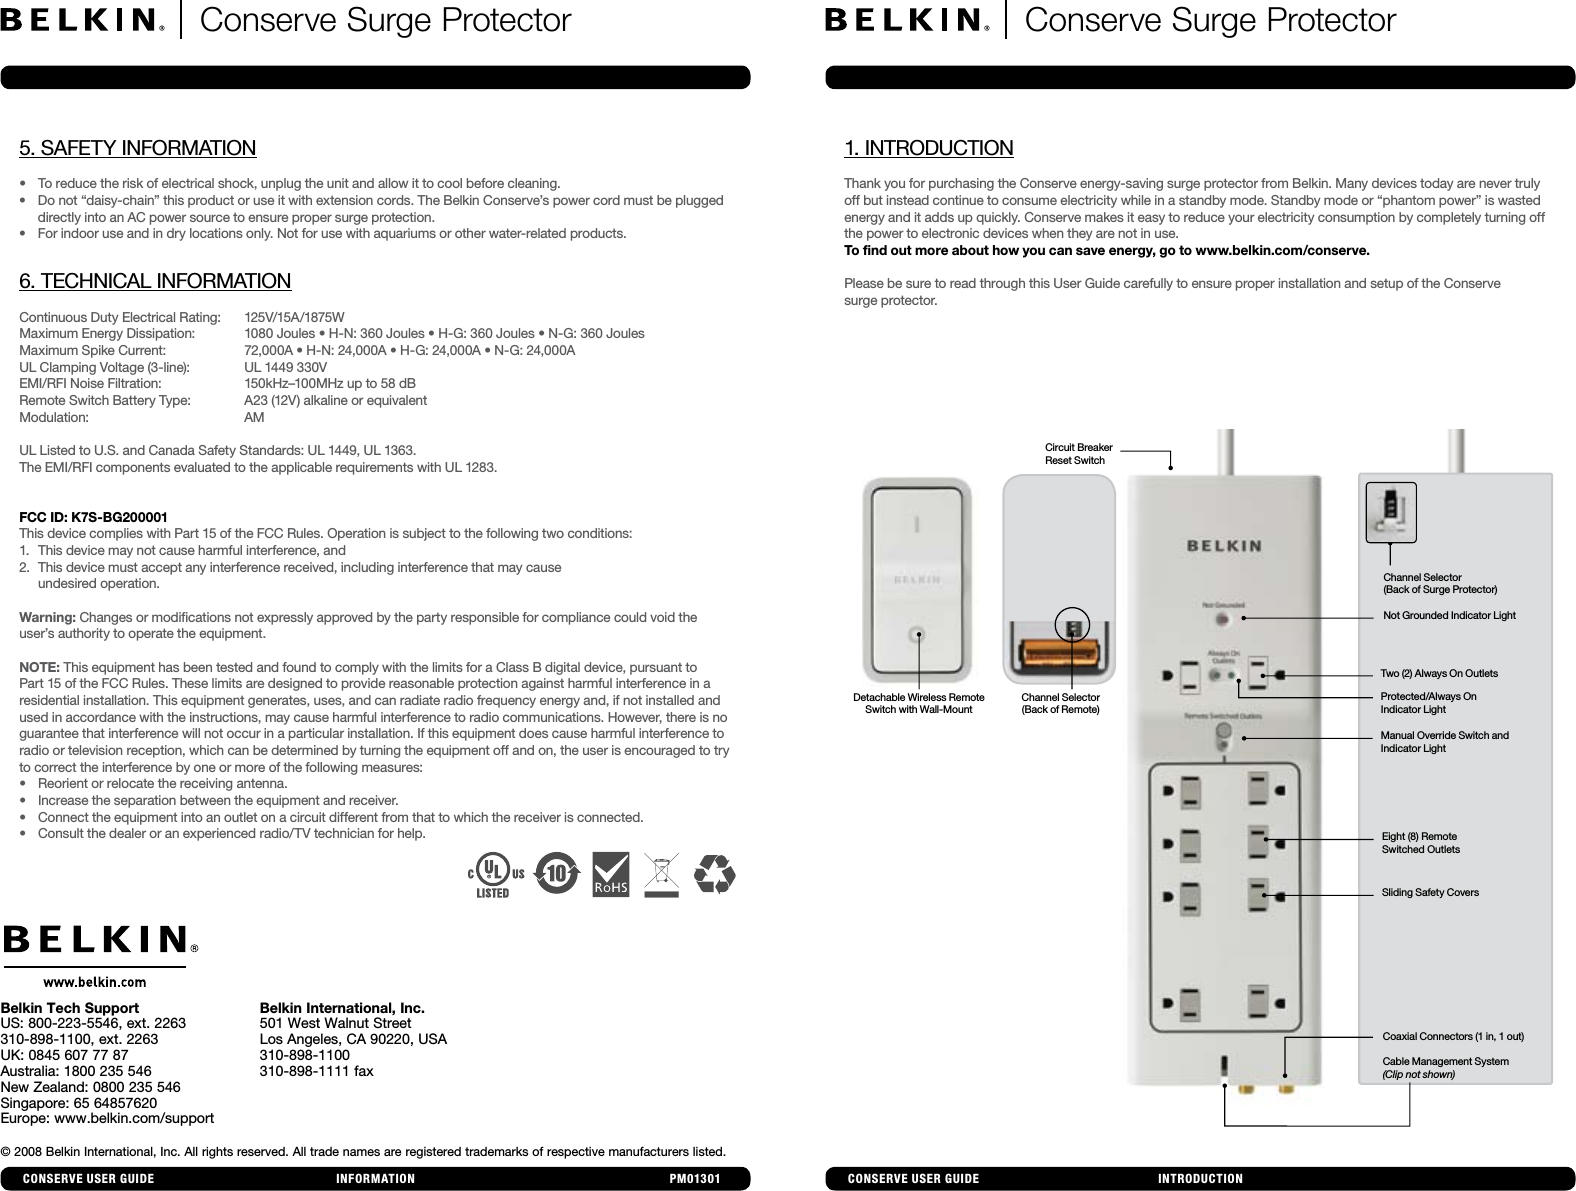 1. INTRODUCTIONThank you for purchasing the Conserve energy-saving surge protector from Belkin. Many devices today are never truly off but instead continue to consume electricity while in a standby mode. Standby mode or “phantom power” is wasted energy and it adds up quickly. Conserve makes it easy to reduce your electricity consumption by completely turning off the power to electronic devices when they are not in use. To find out more about how you can save energy, go to www.belkin.com/conserve.Please be sure to read through this User Guide carefully to ensure proper installation and setup of the Conserve  surge protector.INTRODUCTIONINFORMATION© 2008 Belkin International, Inc. All rights reserved. All trade names are registered trademarks of respective manufacturers listed. Belkin Tech SupportUS: 800-223-5546, ext. 2263310-898-1100, ext. 2263UK: 0845 607 77 87Australia: 1800 235 546New Zealand: 0800 235 546Singapore: 65 64857620Europe: www.belkin.com/supportBelkin International, Inc.501 West Walnut StreetLos Angeles, CA 90220, USA310-898-1100310-898-1111 fax PM01301 CONseRve UseR GUIDeCONseRve UseR GUIDeConserve Surge Protector  Conserve Surge Protector Manual Override Switch and  Indicator LightTwo (2) Always On OutletsNot Grounded Indicator LightSliding Safety CoversEight (8) Remote  Switched OutletsCoaxial Connectors (1 in, 1 out)Cable Management System  (Clip not shown)Protected/Always On  Indicator LightChannel Selector  (Back of Surge Protector)Detachable Wireless Remote  Switch with Wall-MountChannel Selector (Back of Remote) Circuit Breaker   Reset Switch5. SAFETY INFORMATION• Toreducetheriskofelectricalshock,unplugtheunitandallowittocoolbeforecleaning.• Donot“daisy-chain”thisproductoruseitwithextensioncords.TheBelkinConserve’spowercordmustbepluggeddirectly into an AC power source to ensure proper surge protection.• Forindooruseandindrylocationsonly.Notforusewithaquariumsorotherwater-relatedproducts.6. TECHNICAL INFORMATIONContinuous Duty Electrical Rating:   125V/15A/1875WMaximumEnergyDissipation: 1080Joules•H-N:360Joules•H-G:360Joules•N-G:360JoulesMaximumSpikeCurrent: 72,000A•H-N:24,000A•H-G:24,000A•N-G:24,000AUL Clamping Voltage (3-line):   UL 1449 330VEMI/RFI Noise Filtration:    150kHz–100MHz up to 58 dB Remote Switch Battery Type:  A23 (12V) alkaline or equivalentModulation:   AMUL Listed to U.S. and Canada Safety Standards: UL 1449, UL 1363.The EMI/RFI components evaluated to the applicable requirements with UL 1283.FCC ID: K7S-BG200001This device complies with Part 15 of the FCC Rules. Operation is subject to the following two conditions:1.  This device may not cause harmful interference, and 2.  This device must accept any interference received, including interference that may cause   undesired operation.Warning: Changes or modifications not expressly approved by the party responsible for compliance could void the user’sauthoritytooperatetheequipment.NOTE: This equipment has been tested and found to comply with the limits for a Class B digital device, pursuant to Part 15 of the FCC Rules. These limits are designed to provide reasonable protection against harmful interference in a residential installation. This equipment generates, uses, and can radiate radio frequency energy and, if not installed and used in accordance with the instructions, may cause harmful interference to radio communications. However, there is no guarantee that interference will not occur in a particular installation. If this equipment does cause harmful interference to radio or television reception, which can be determined by turning the equipment off and on, the user is encouraged to try to correct the interference by one or more of the following measures:• Reorientorrelocatethereceivingantenna.• Increasetheseparationbetweentheequipmentandreceiver.• Connecttheequipmentintoanoutletonacircuitdifferentfromthattowhichthereceiverisconnected.• Consultthedealeroranexperiencedradio/TVtechnicianforhelp.